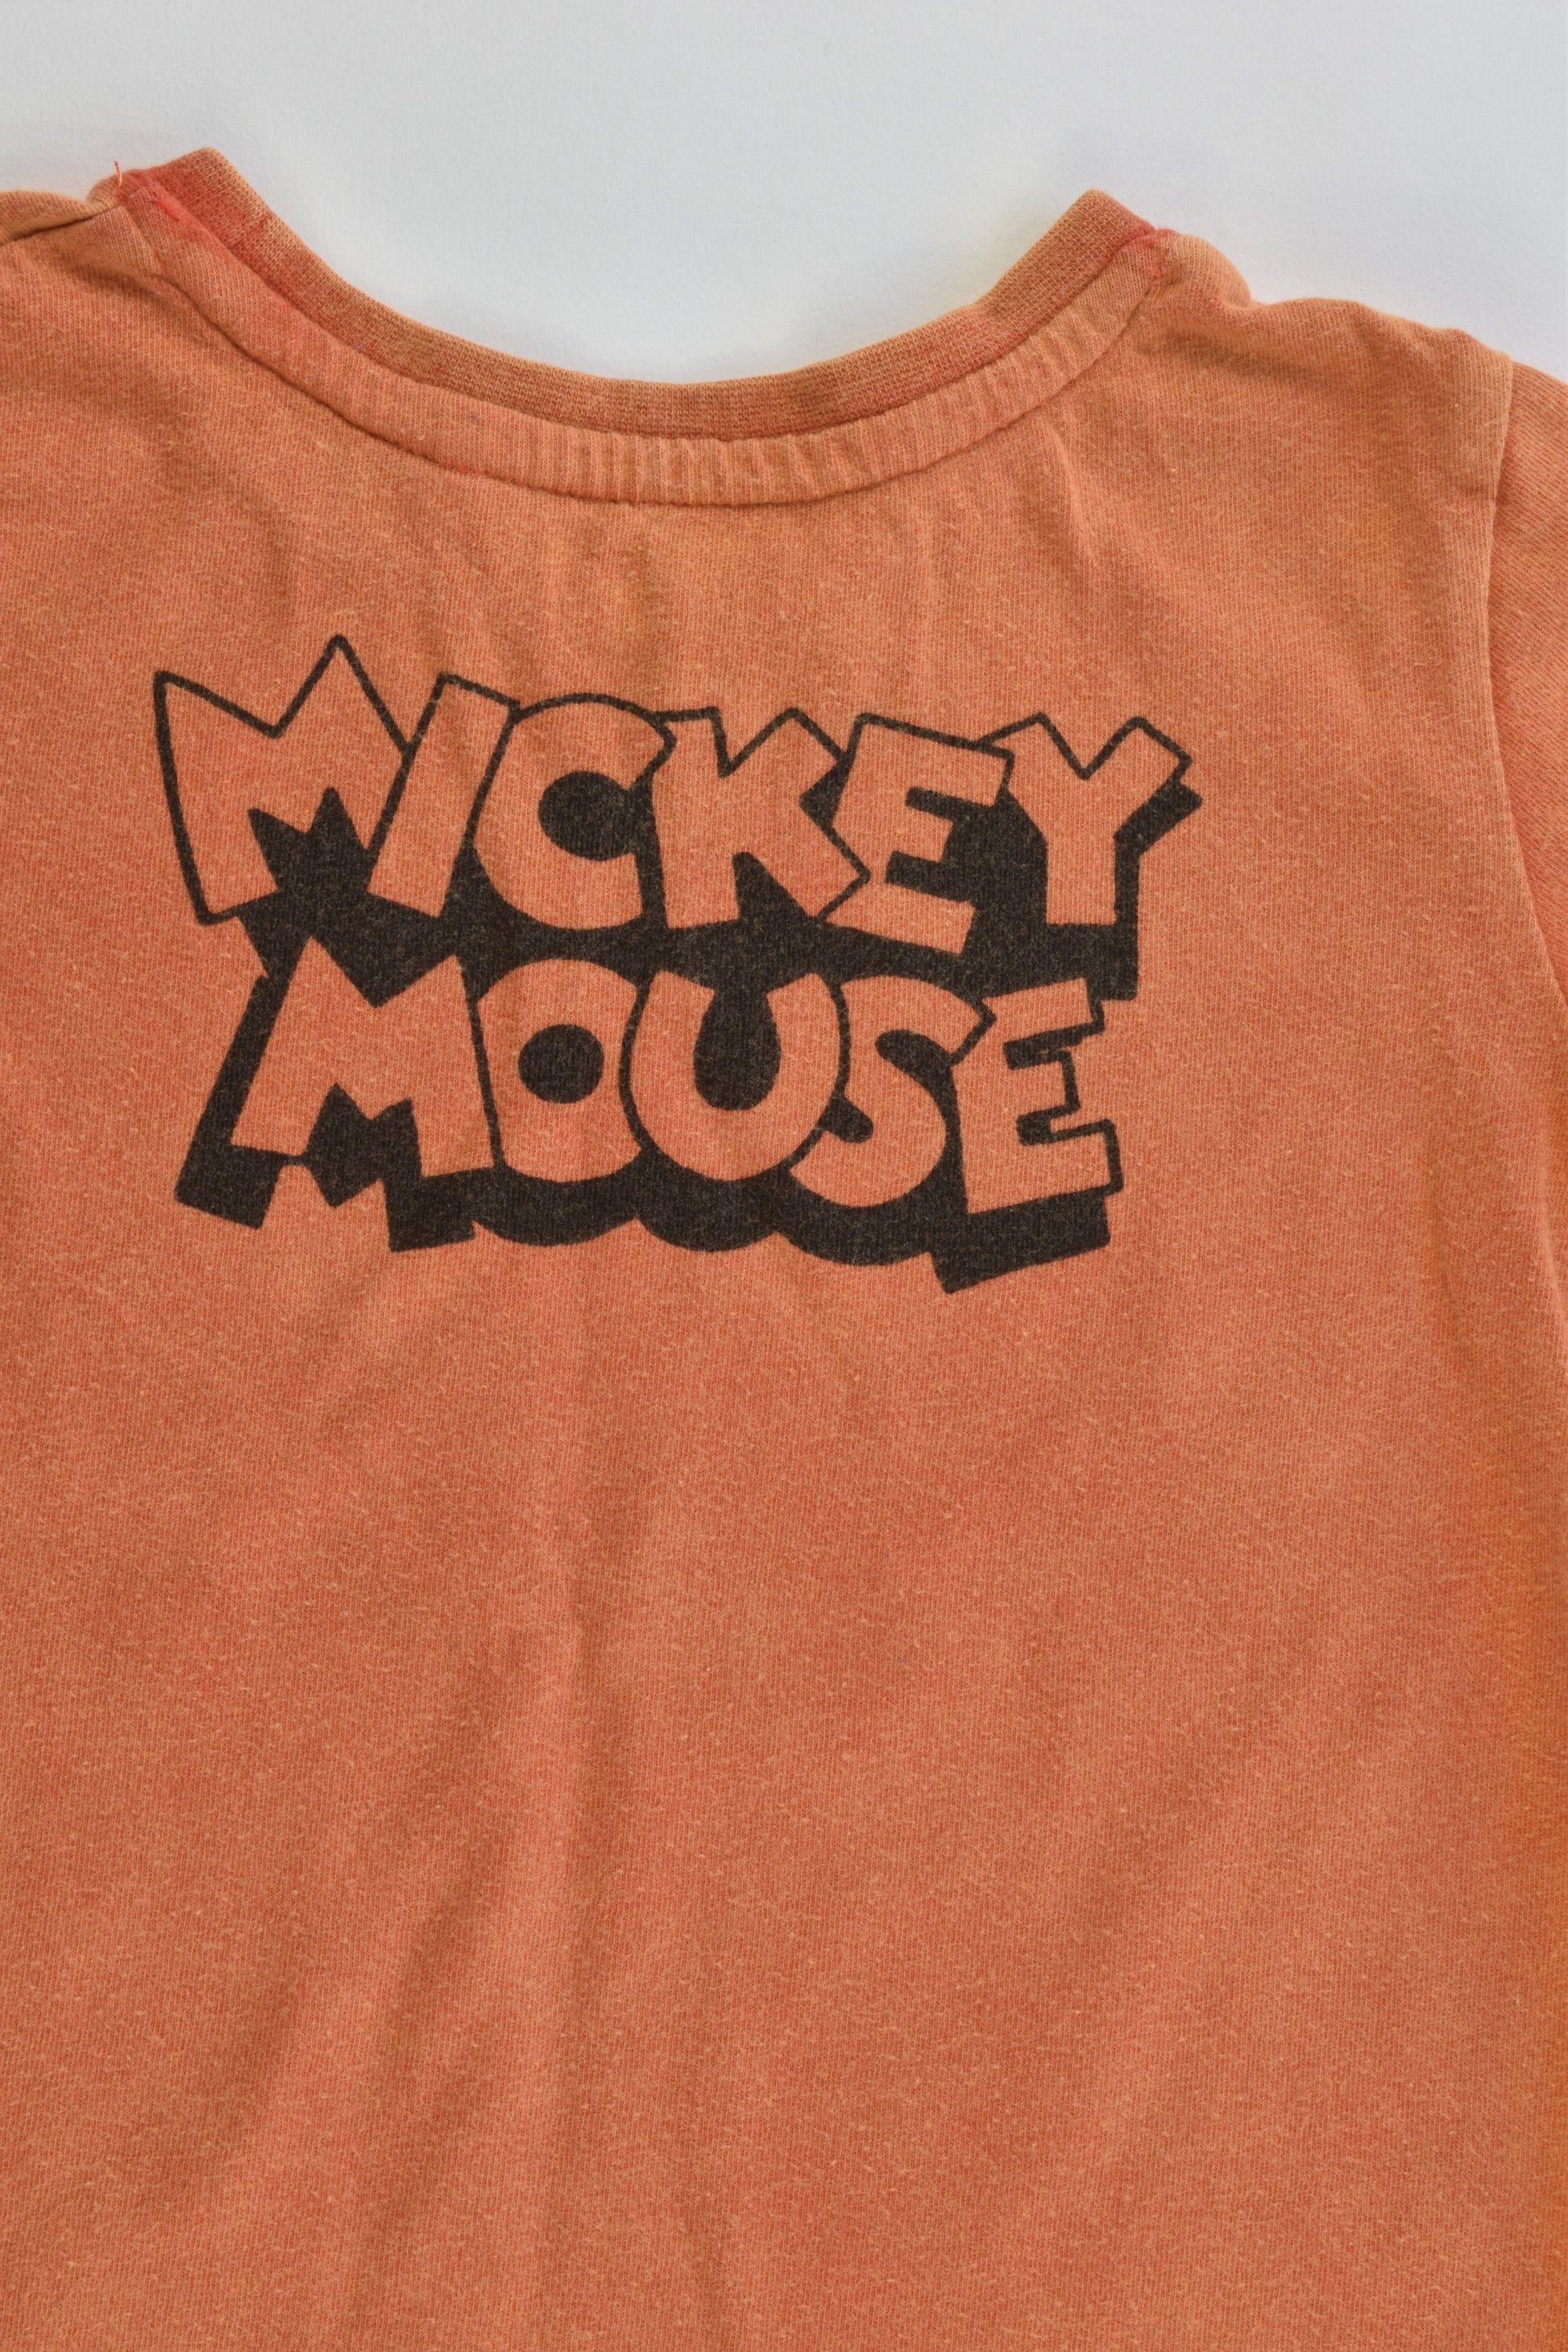 Mickey Mouse by Target Size 2 T-shirt